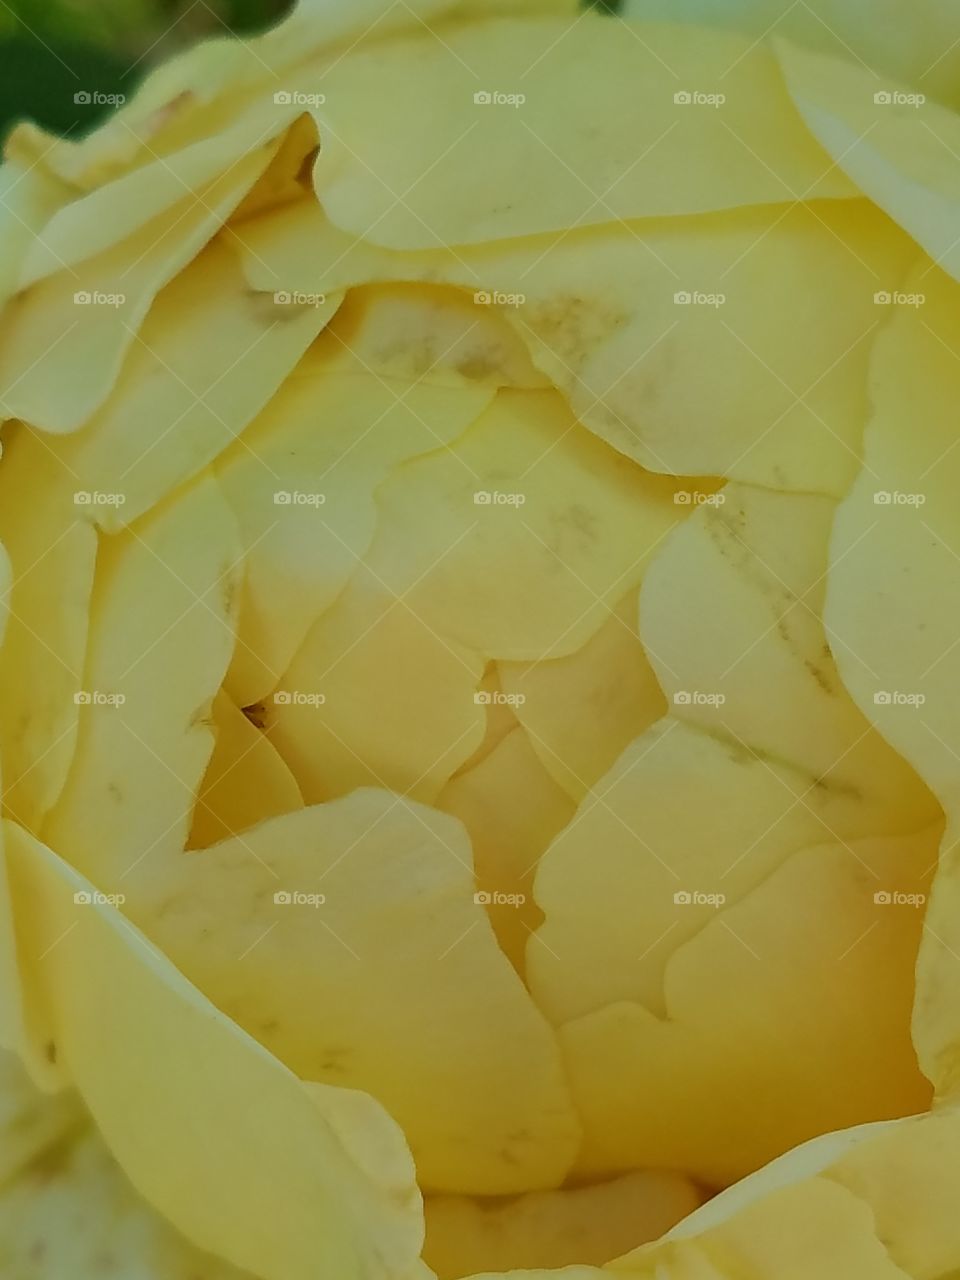 over saturated yellow rose